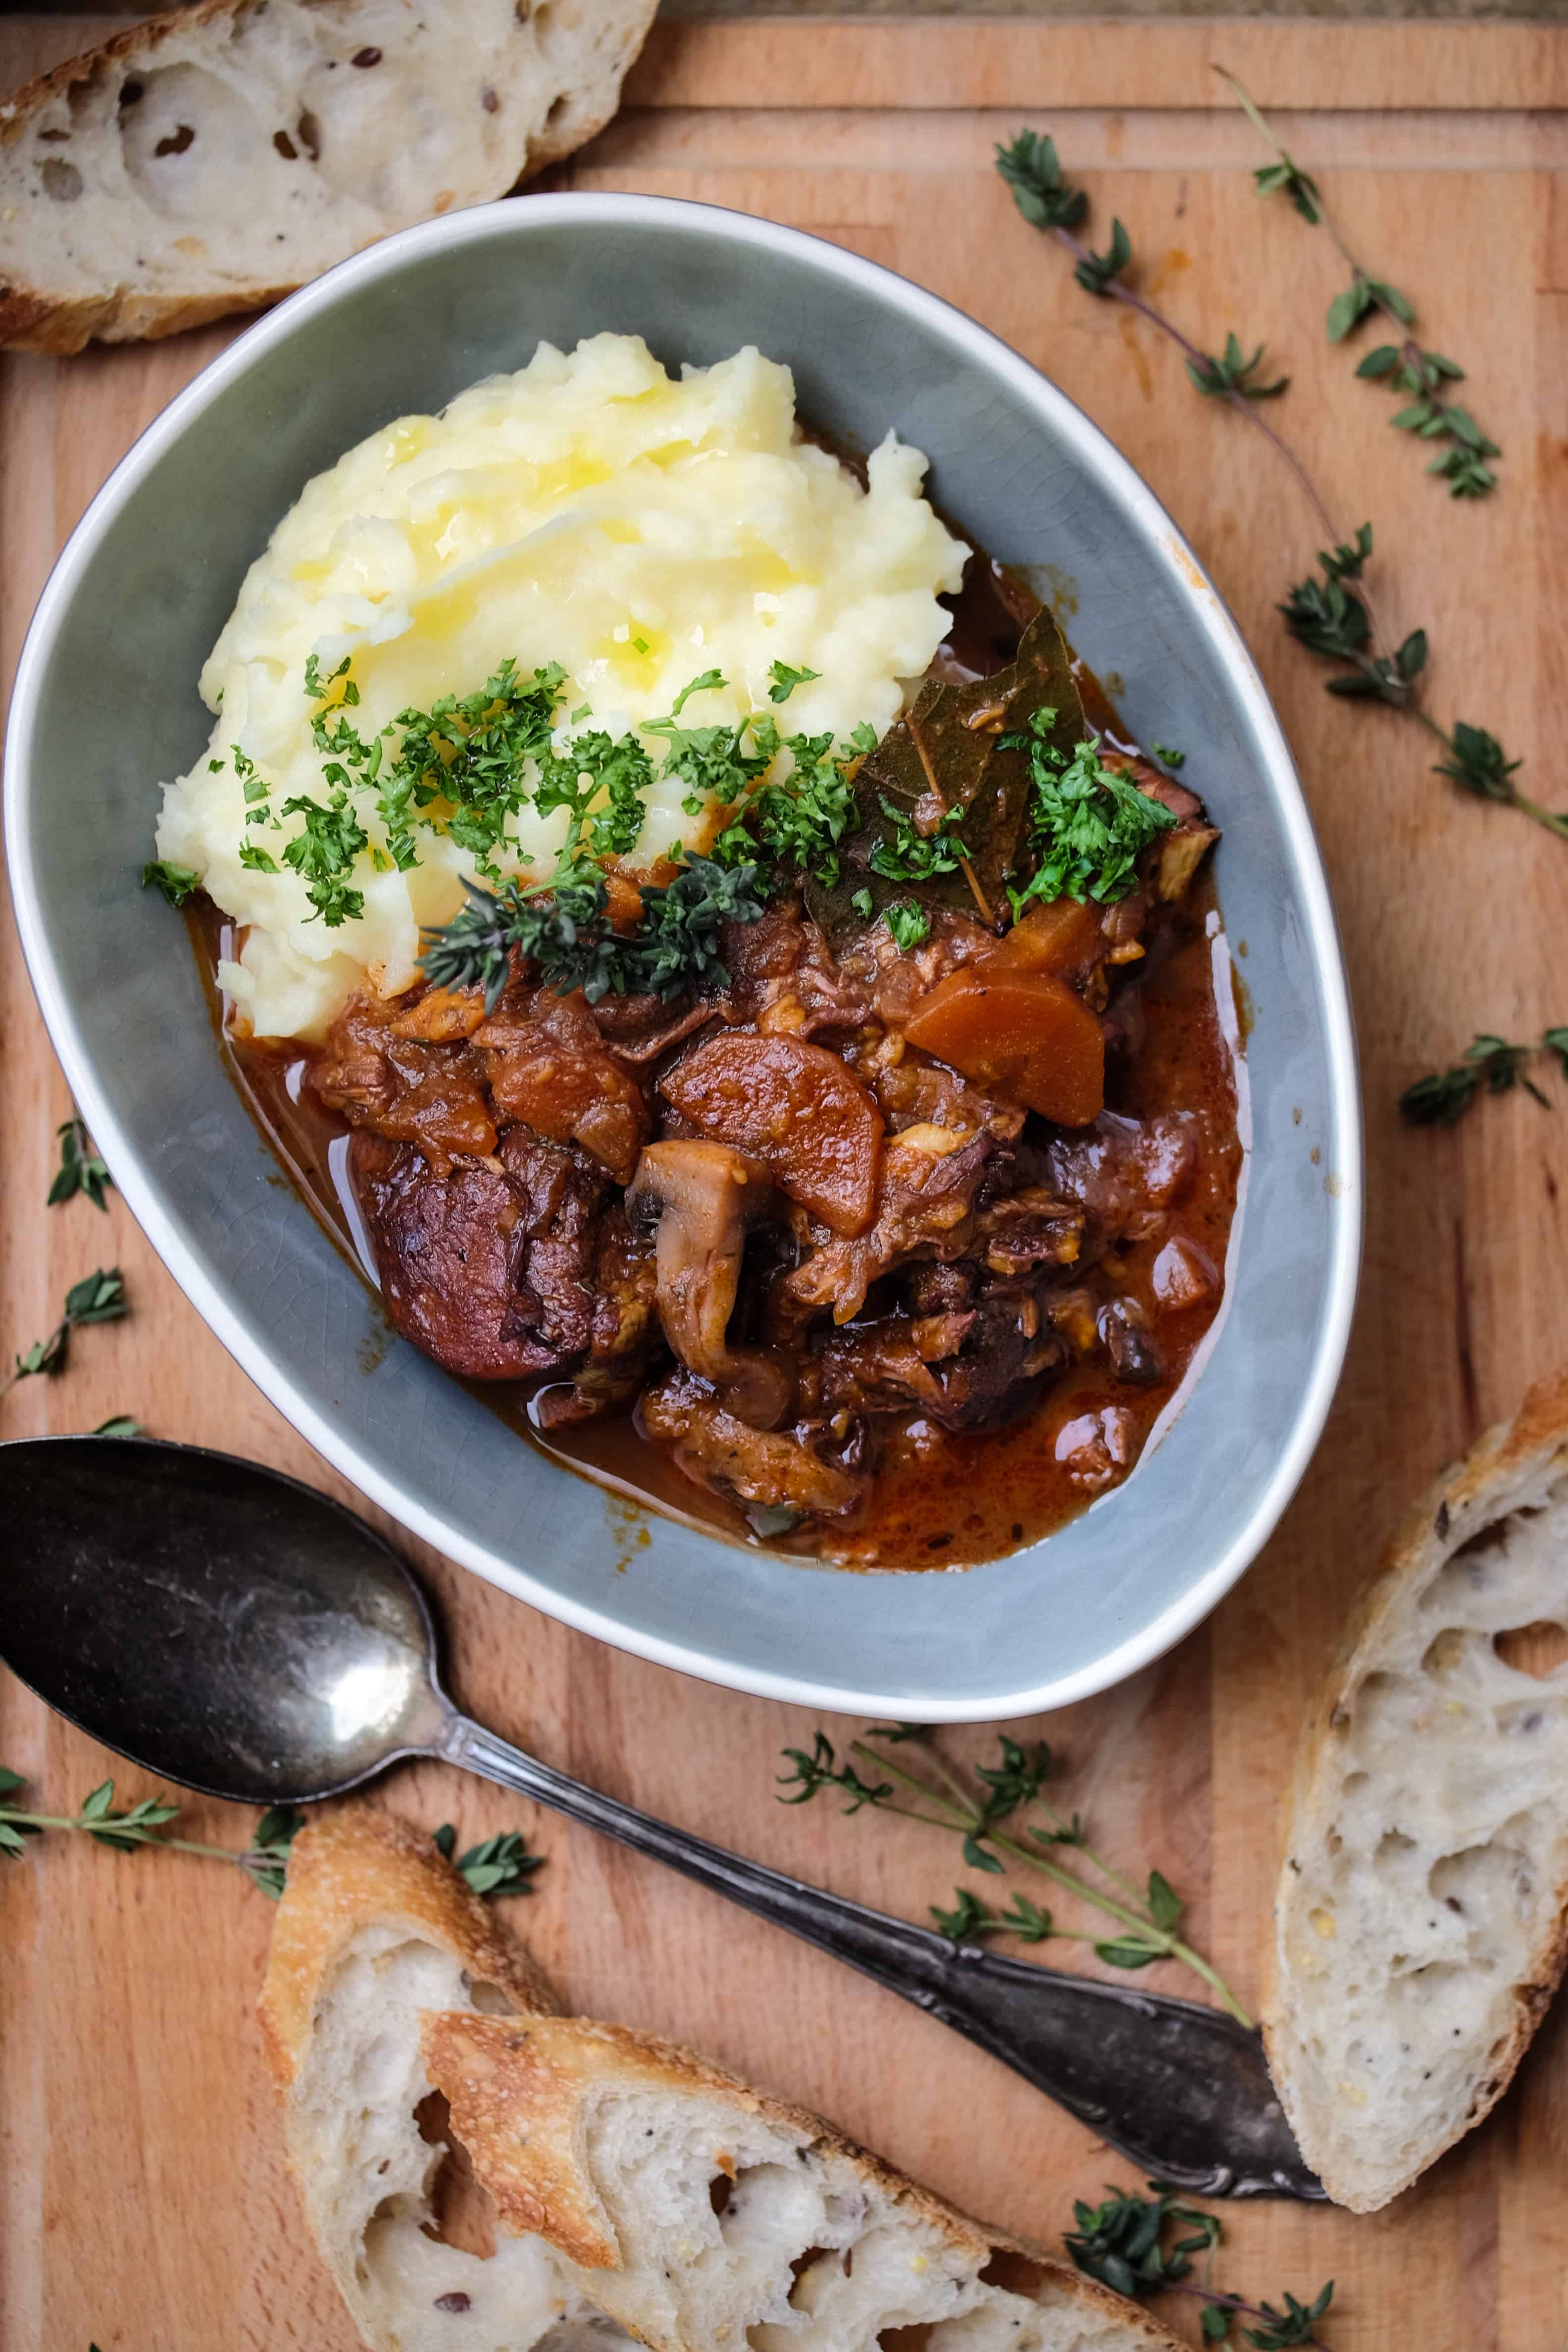 Coq au vin &amp;quot;The french Classic for special occasions&amp;quot; - Truefoodsblog